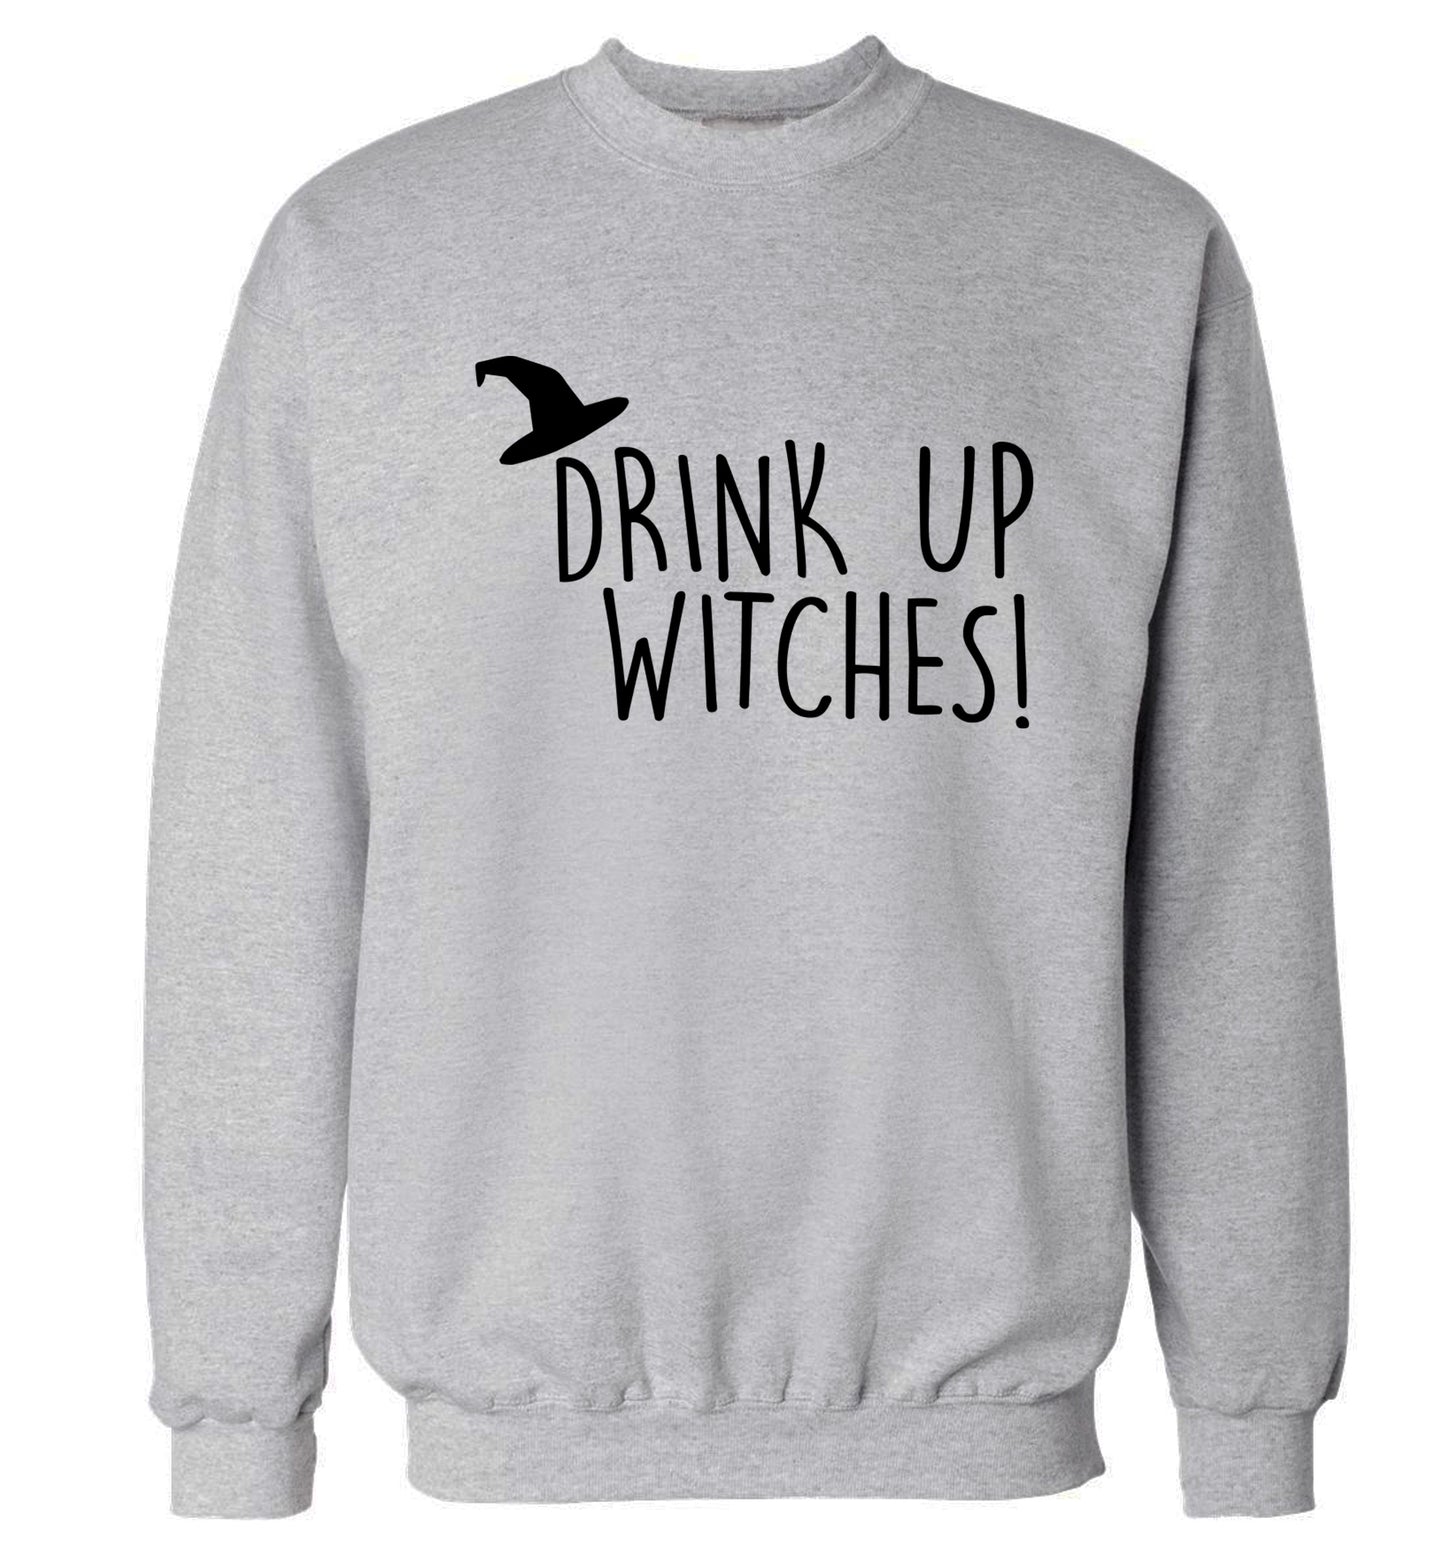 Drink up witches Adult's unisex grey Sweater 2XL